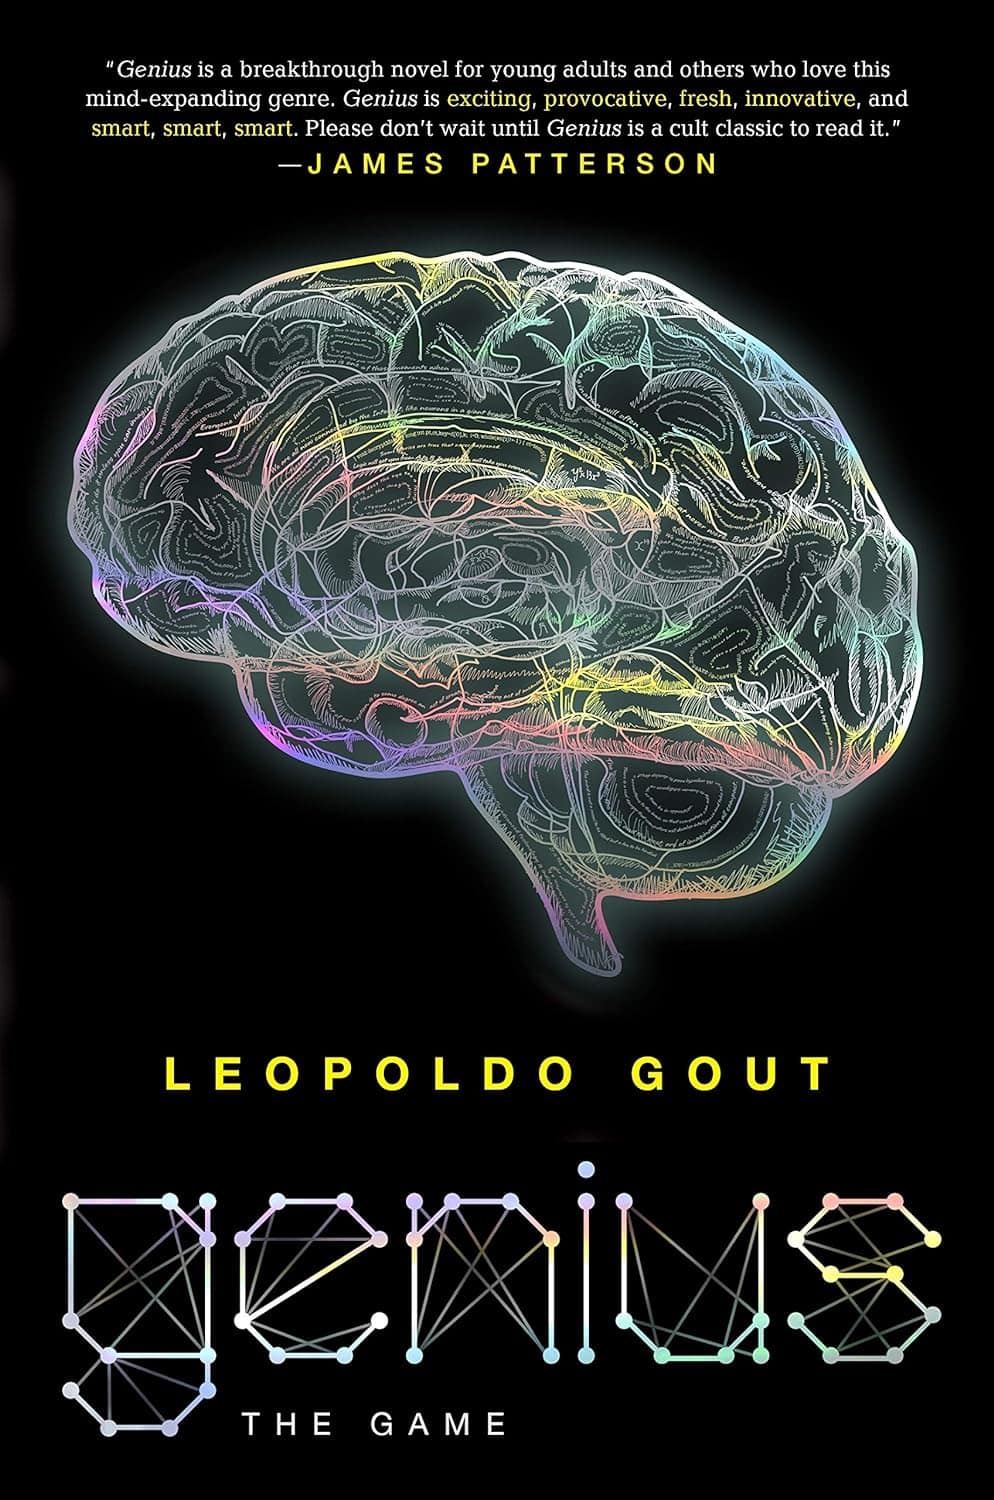 Genius: The Game, by Leopoldo Gout